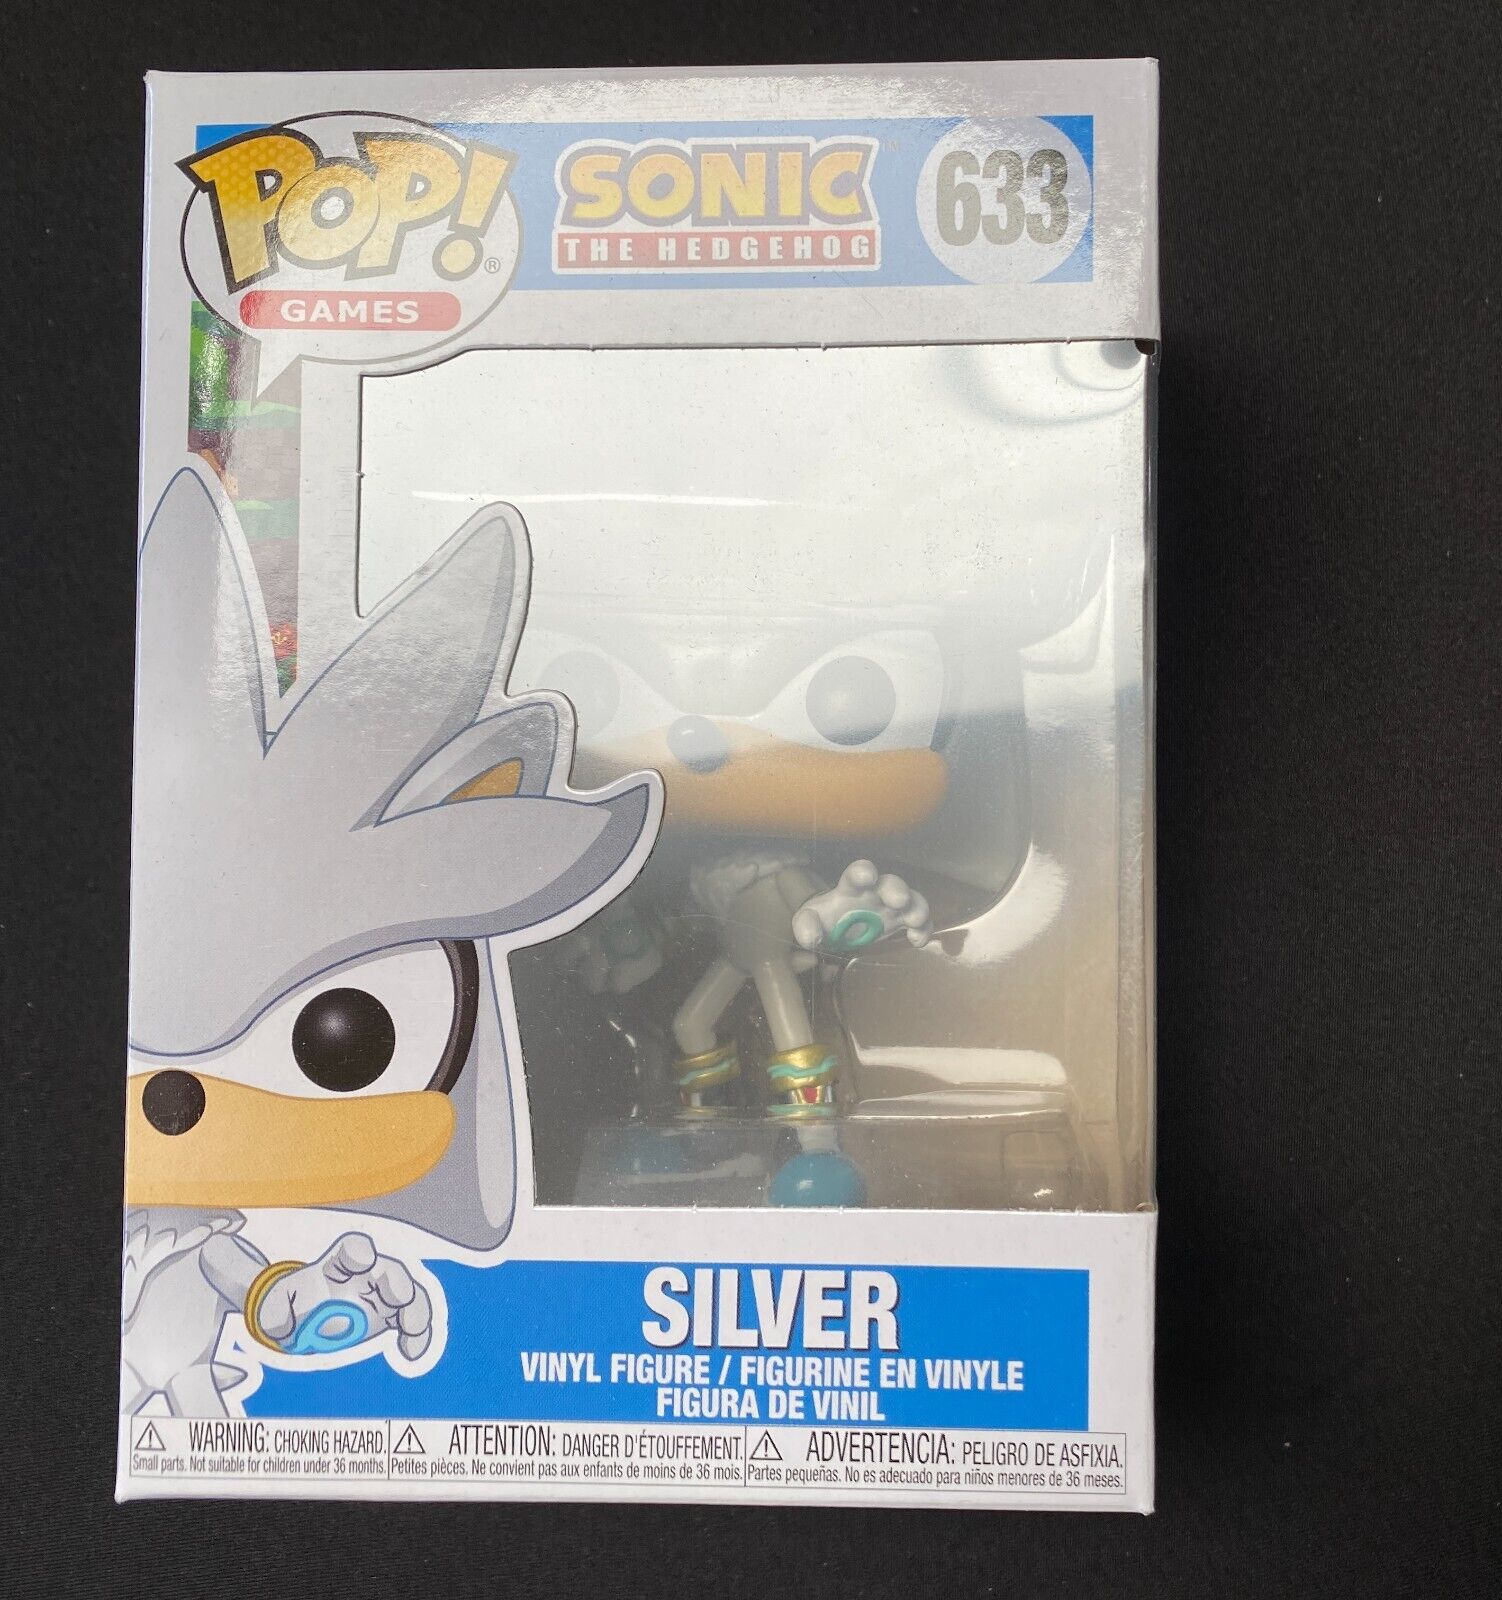  Funko Pops Sonic the Hedgehog Silver #633 + Pop Protector